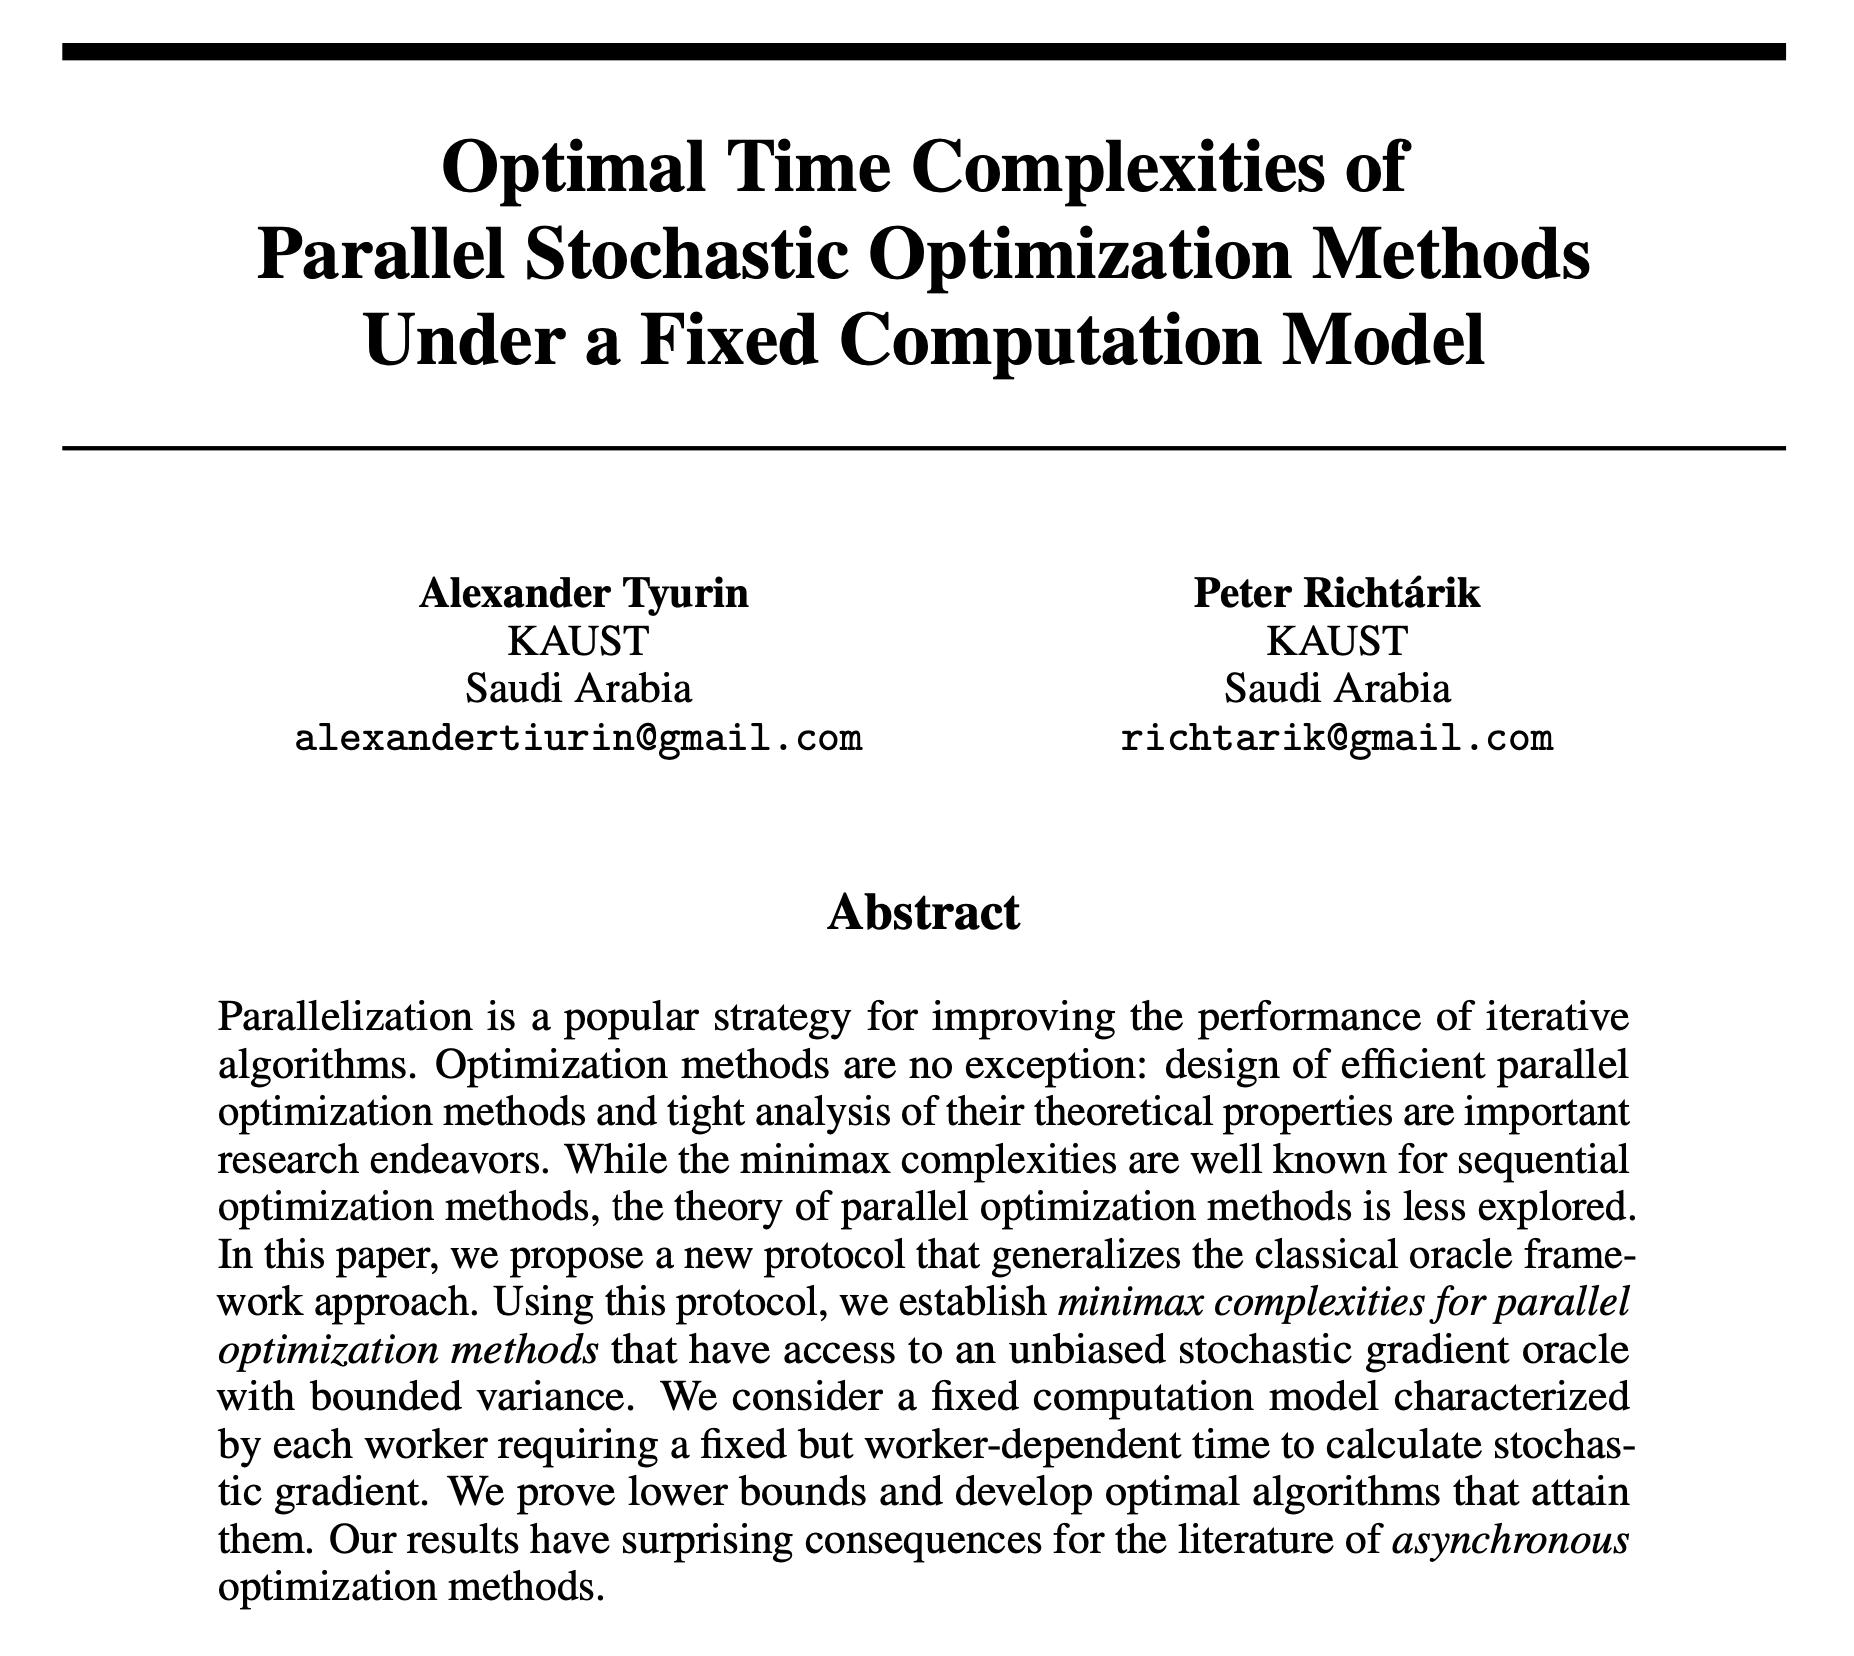 Optimal Time Complexities of Parallel Stochastic Optimization Methods Under a Fixed Computation Model